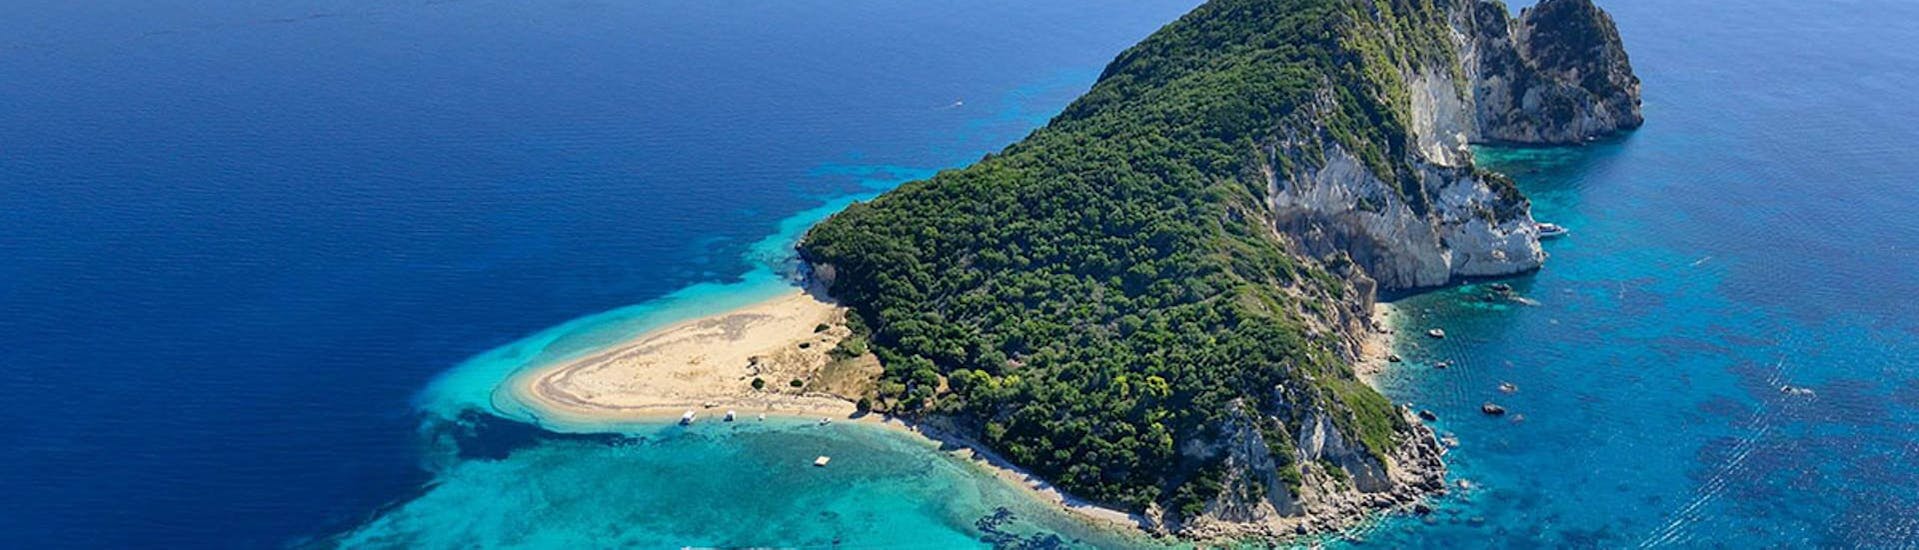 View of Turtle Island, which can be visited on the Private Boat Trip to Turtle Island and Mizithres Rocks with Traventure.